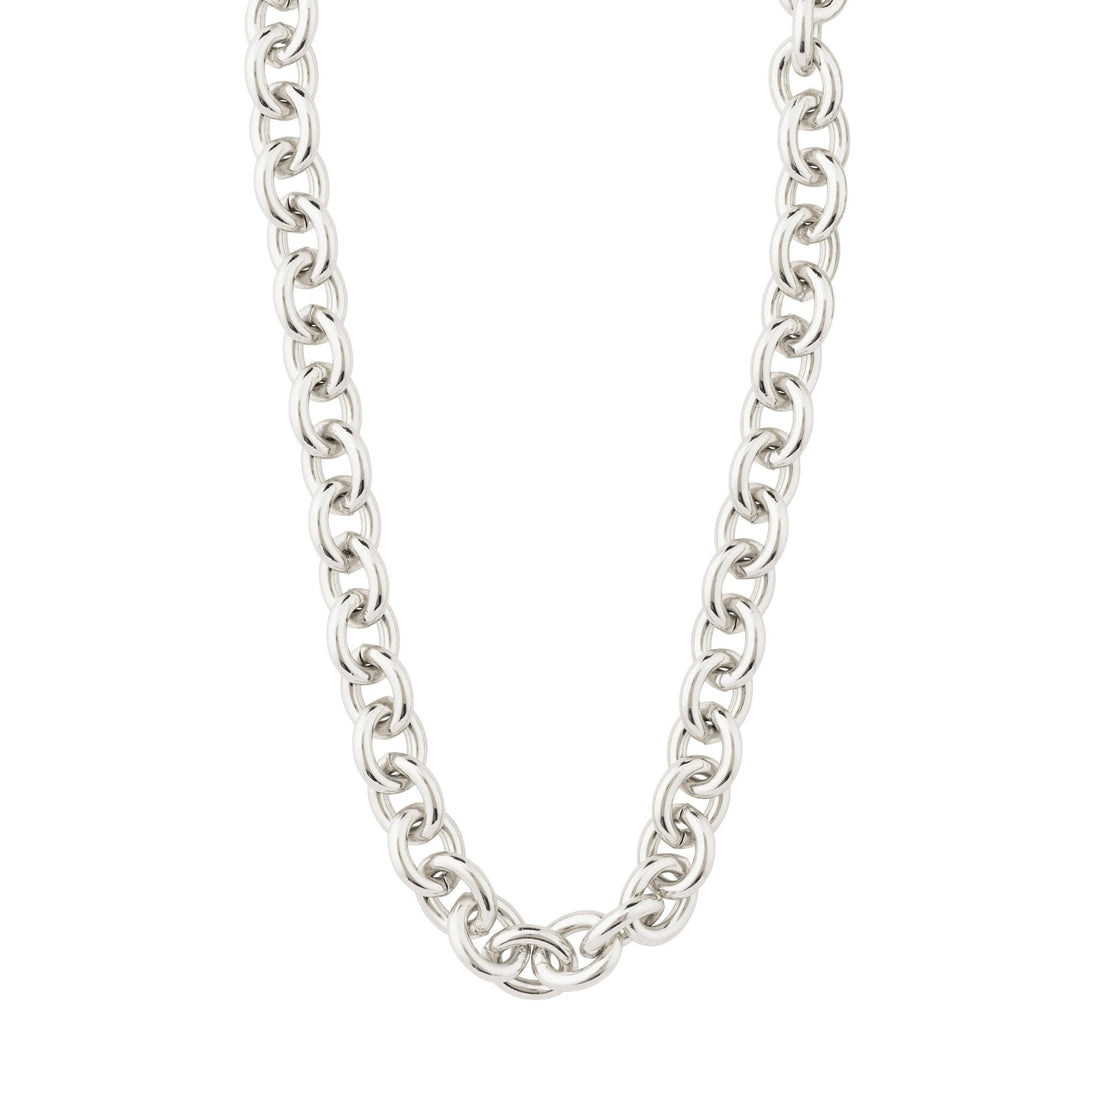 HANNA Recycled Chain Necklace - PILGRIM